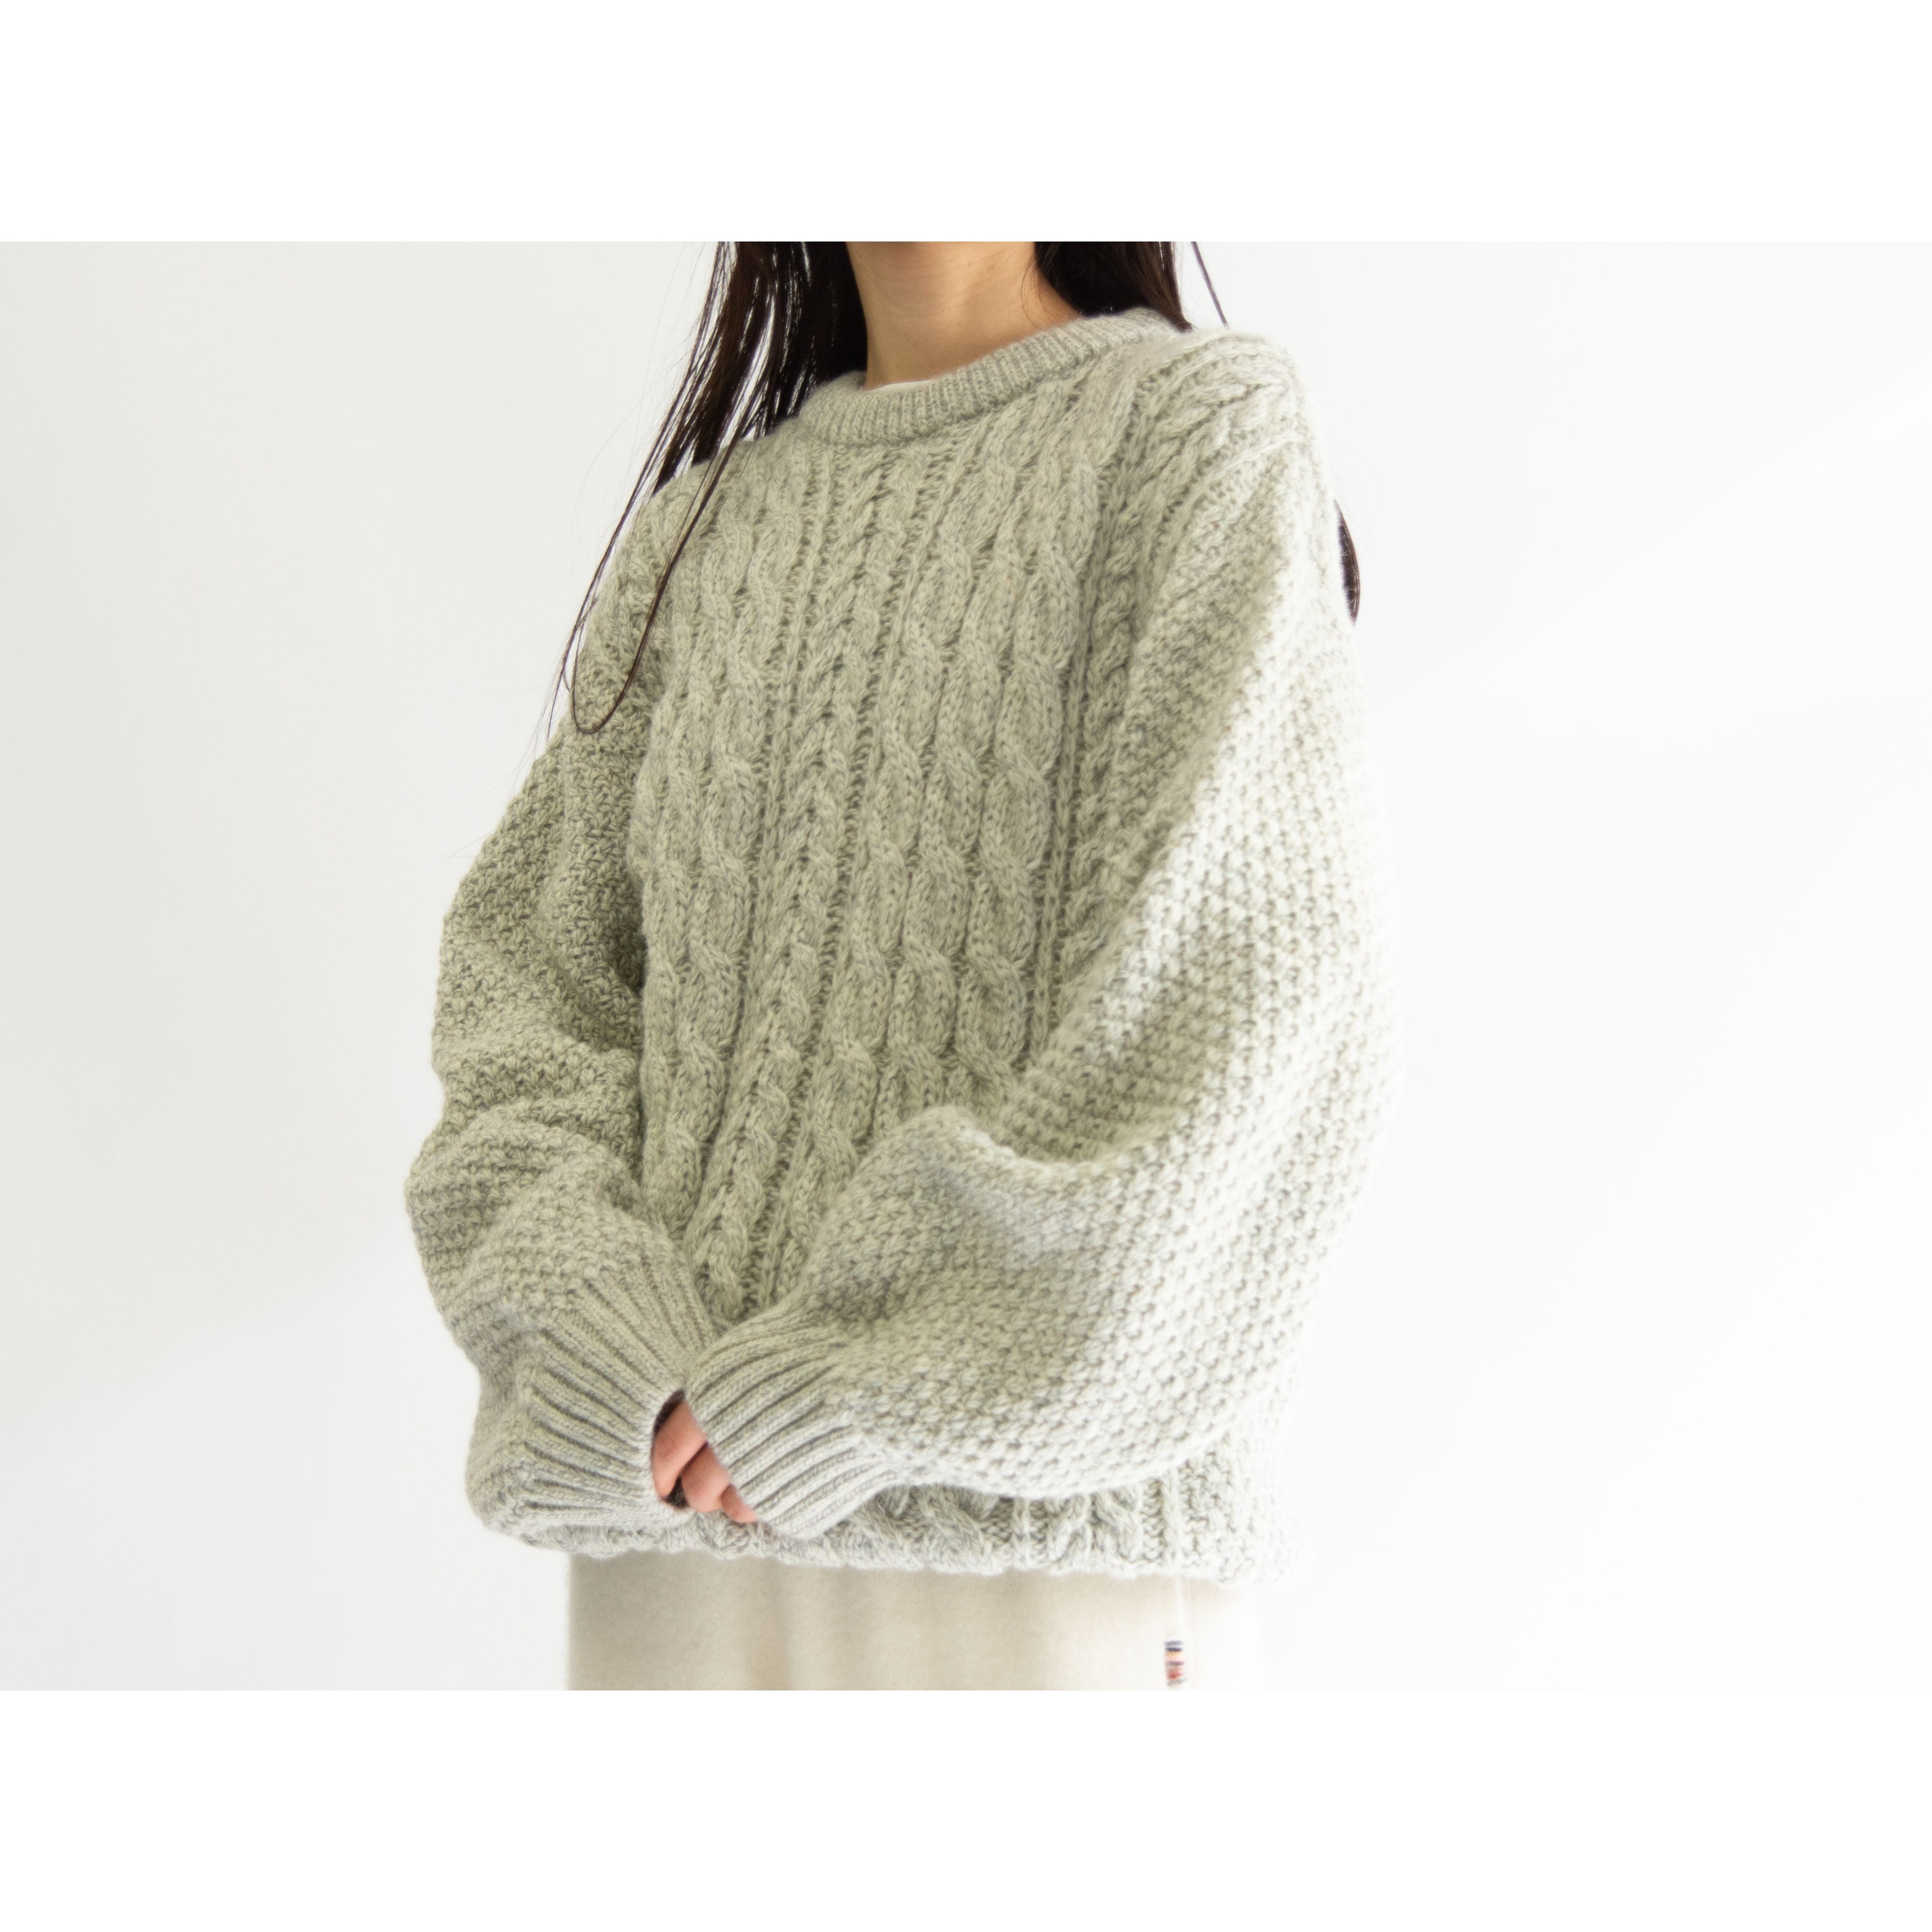 Regency】Made in England 100% Wool Cable Sweater（英国製 ケーブル